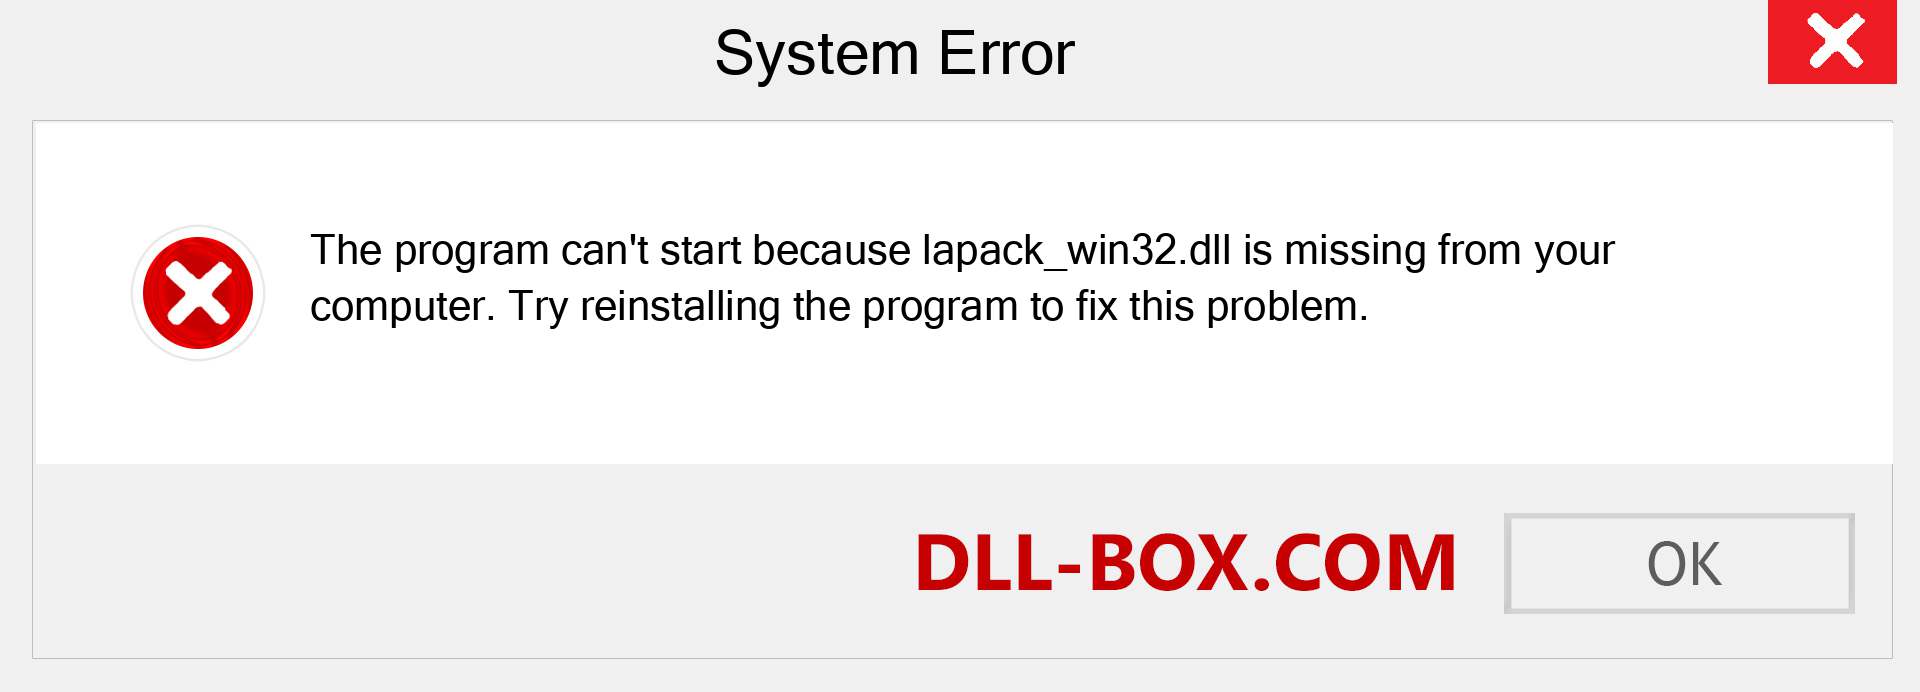  lapack_win32.dll file is missing?. Download for Windows 7, 8, 10 - Fix  lapack_win32 dll Missing Error on Windows, photos, images